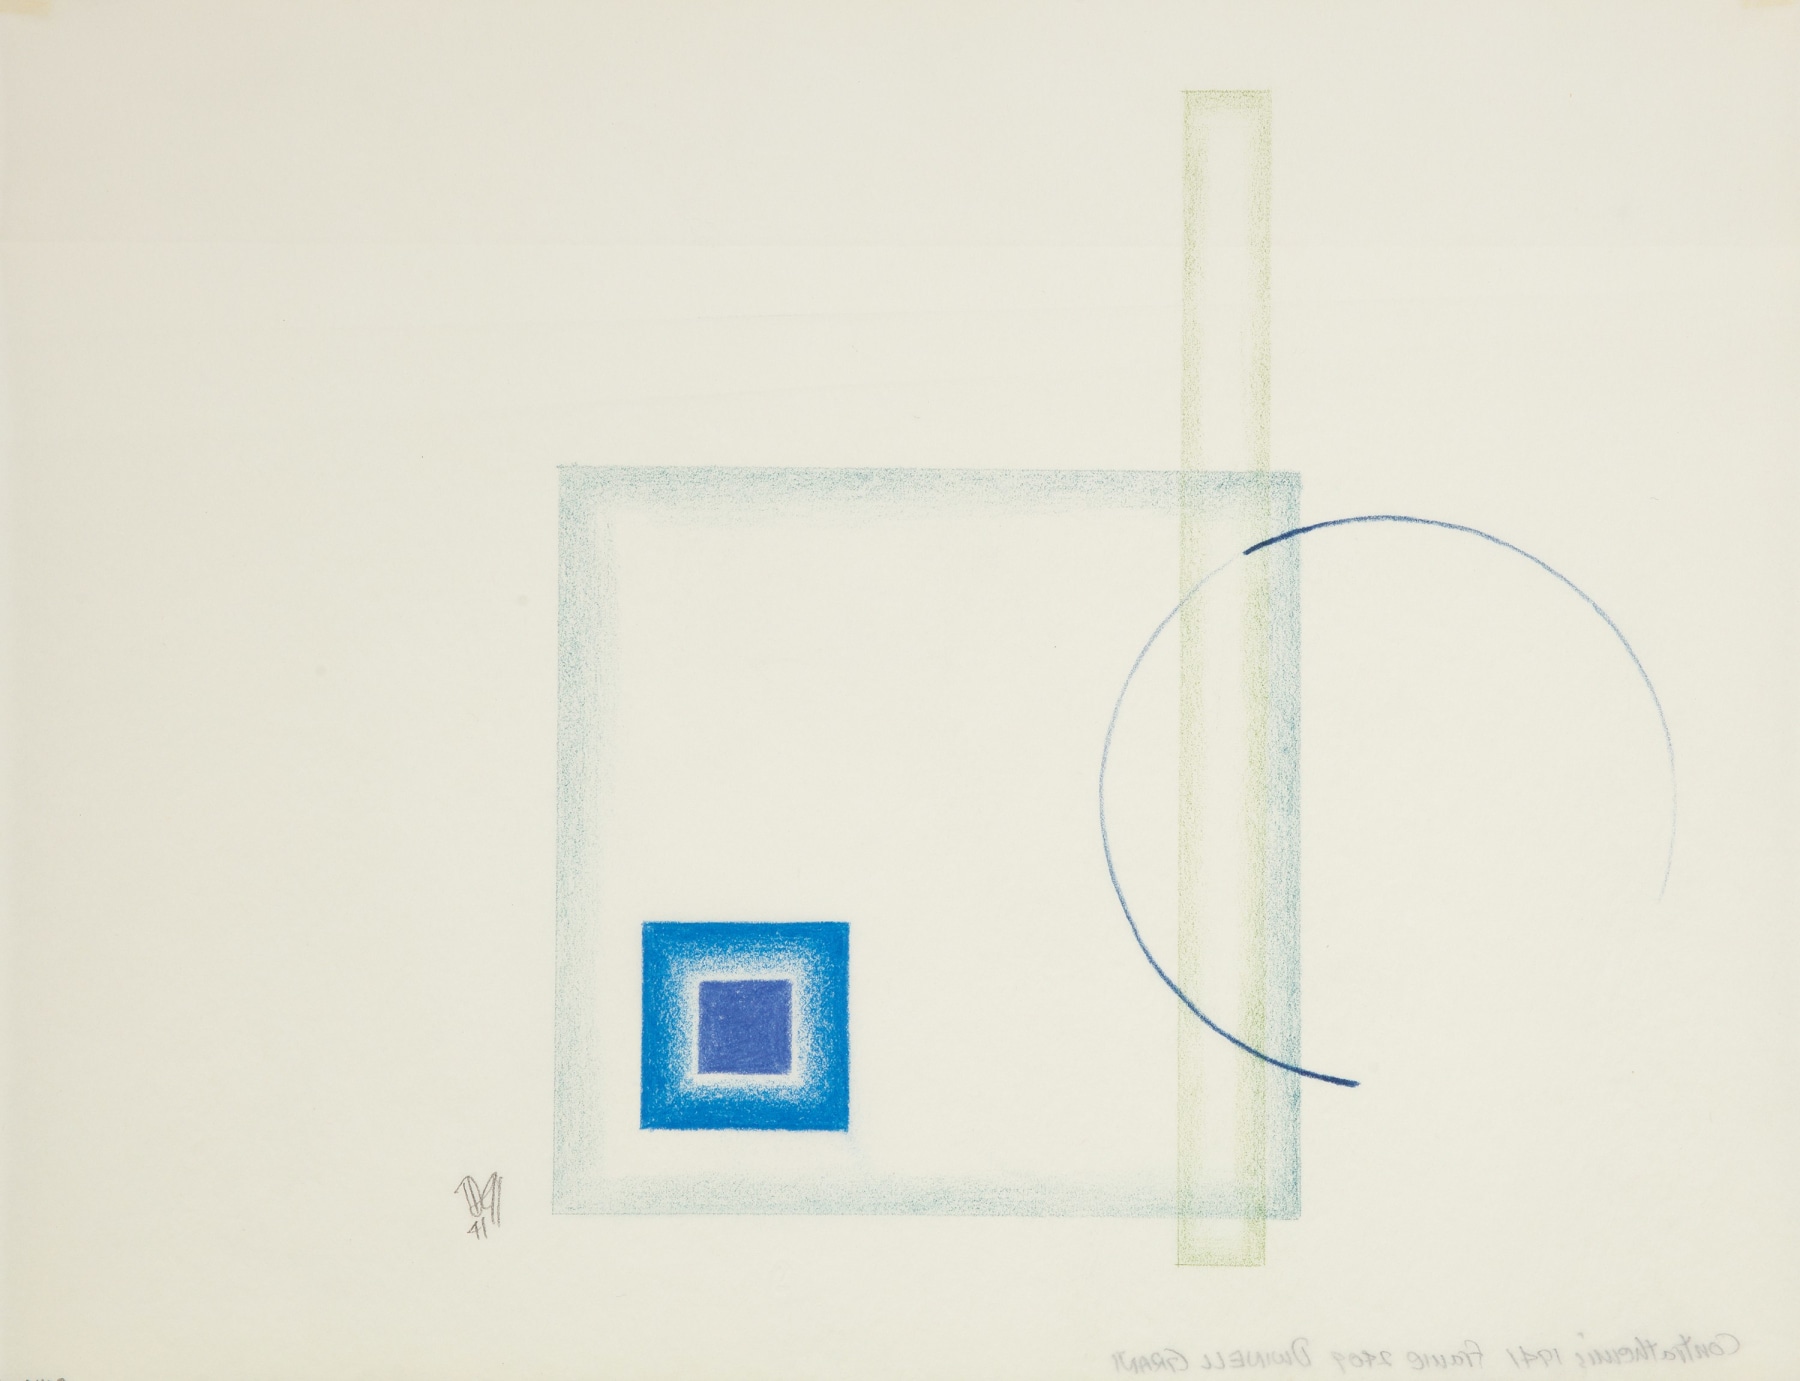 Dwinell Grant, Contrathemis Frame 2409, 1941,  Colored pencil on tracing paper, 8 x 10 1/2 inches, 3 blue squares, and one vertical sphere. Dwinell Grant made experimental modernist and constructivist films and paintings.